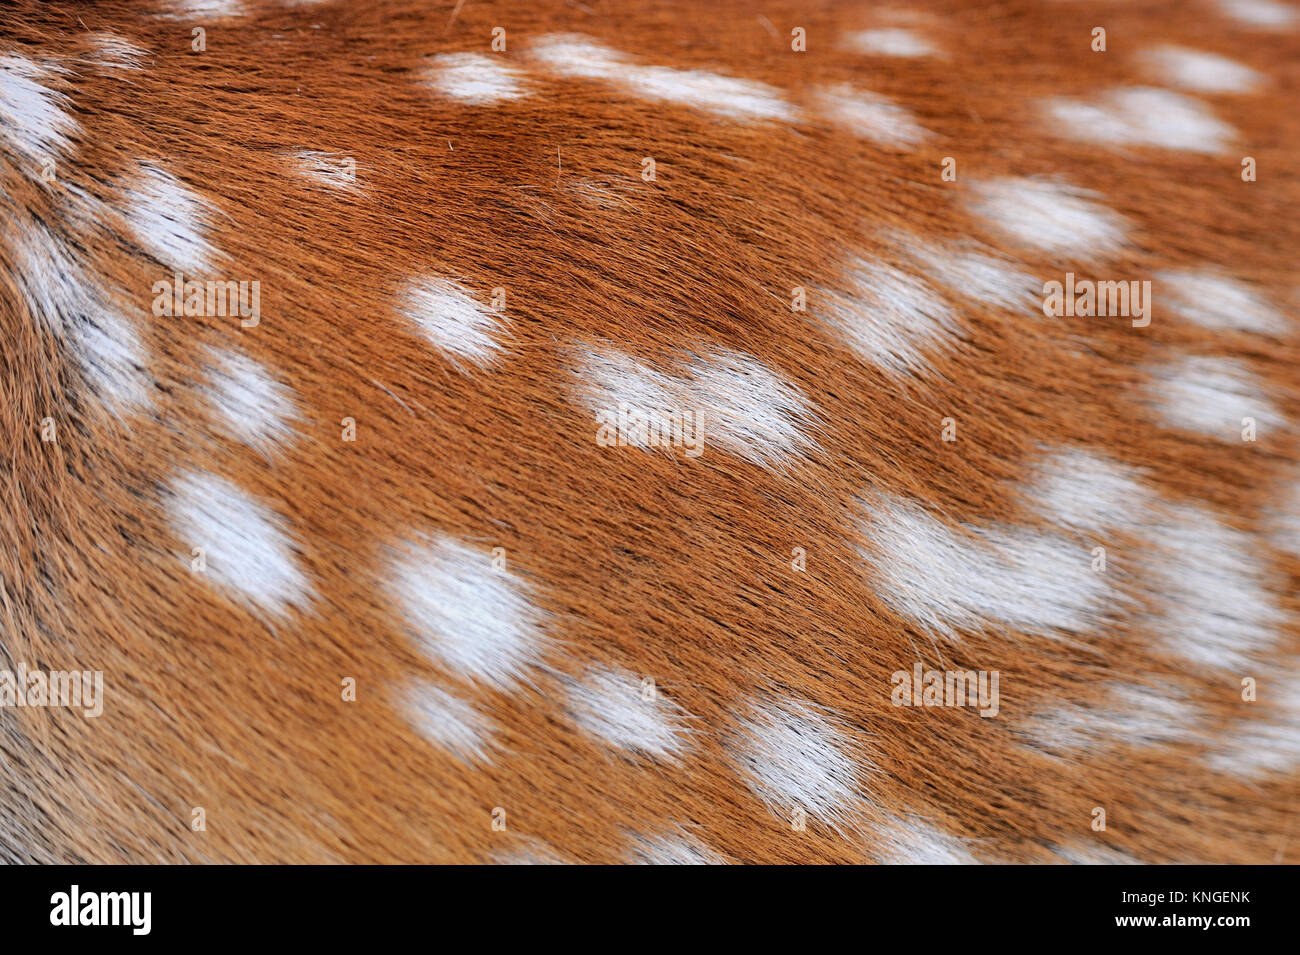 Texture of real axis sika deer fur Stock Photo